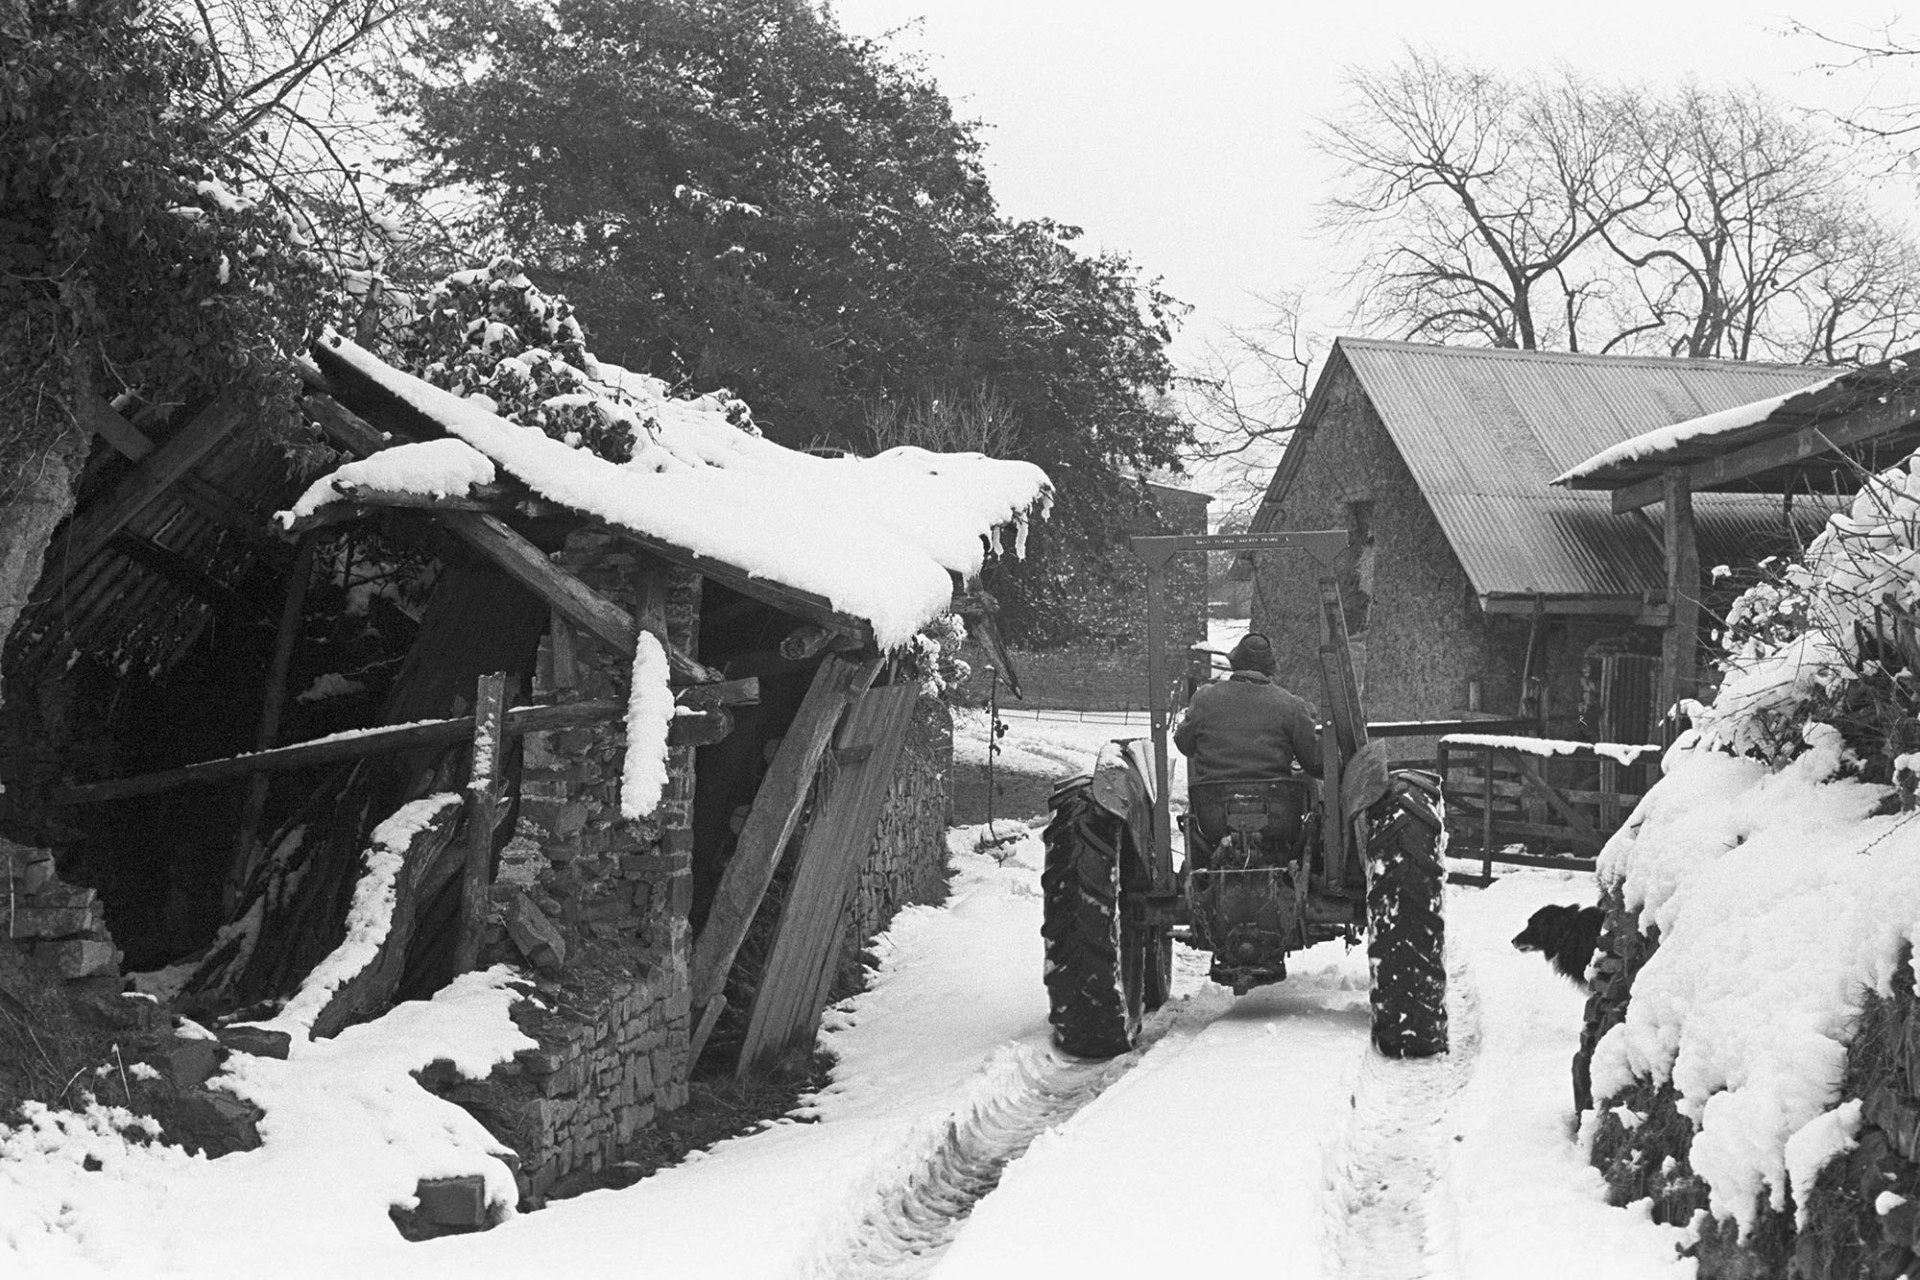 Snow, tractor and collapsed farm buildings, shed. 
[Alf Pugsley driving a tractor through the snow covered farmyard at Lower Langham Farm, Dolton. A snow covered collapsed barn is visible in the foreground and other farm buildings can be seen in the background.]